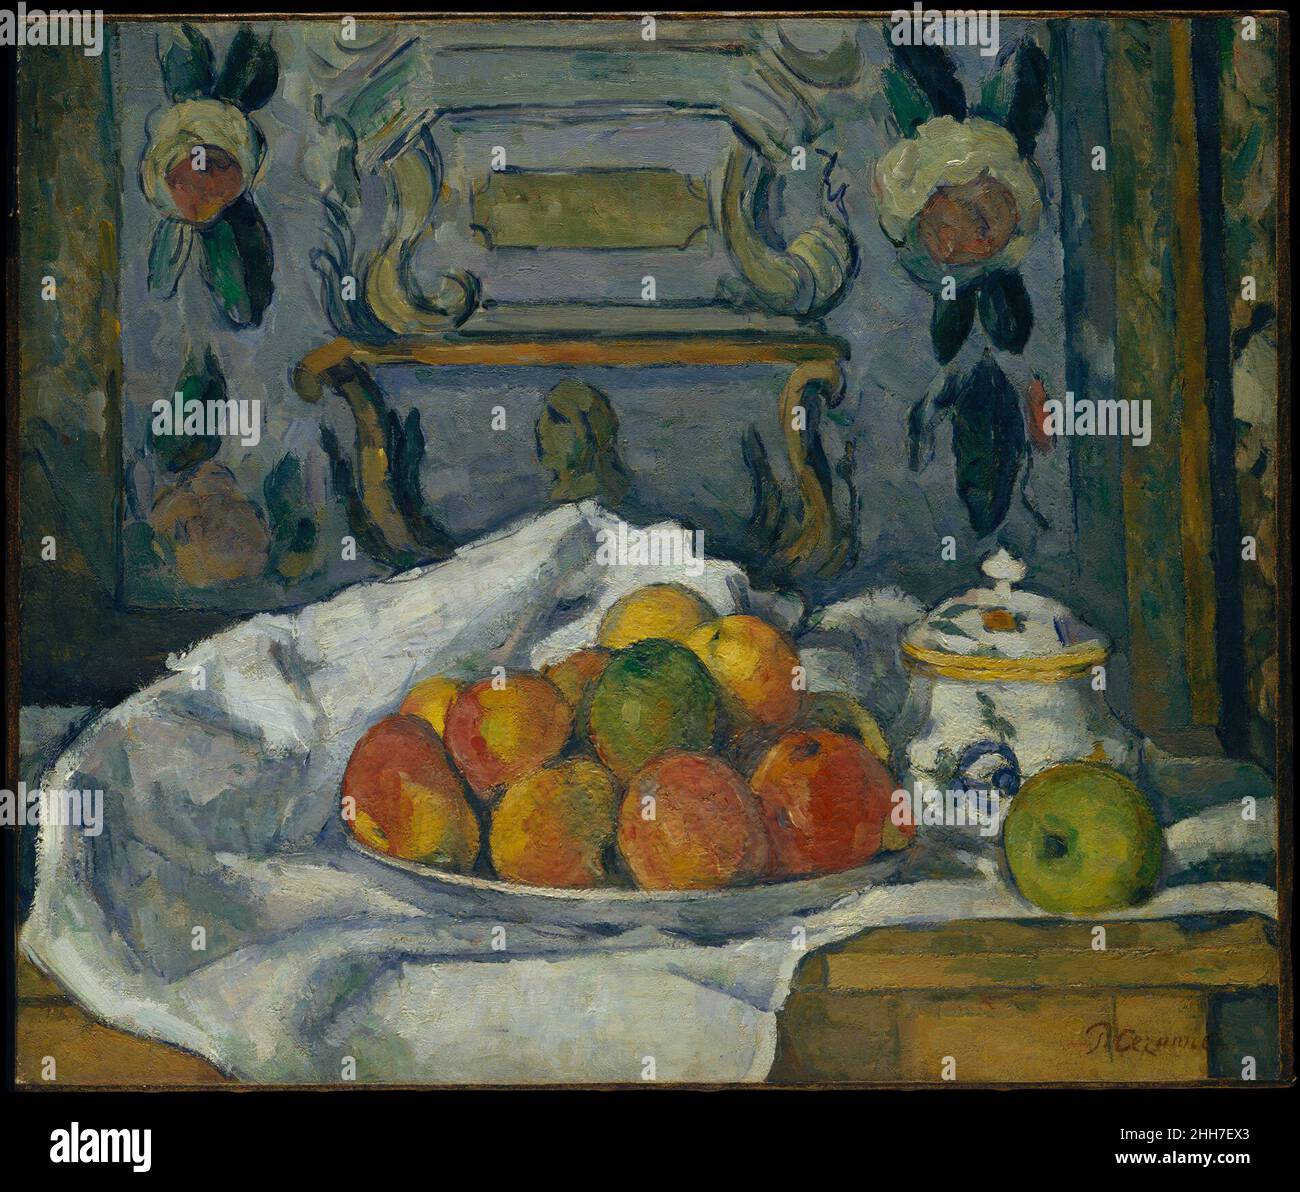 Dish of Apples ca. 1876–77 Paul Cézanne French This rich and dense still life, featuring a napkin shaped like Mont Sainte-Victoire, was painted about 1876–77 in the house of Cézanne's father in Aix. The decorative screen visible in the background was long thought to have been made by the artist in his youth.. Dish of Apples  437989 Stock Photo